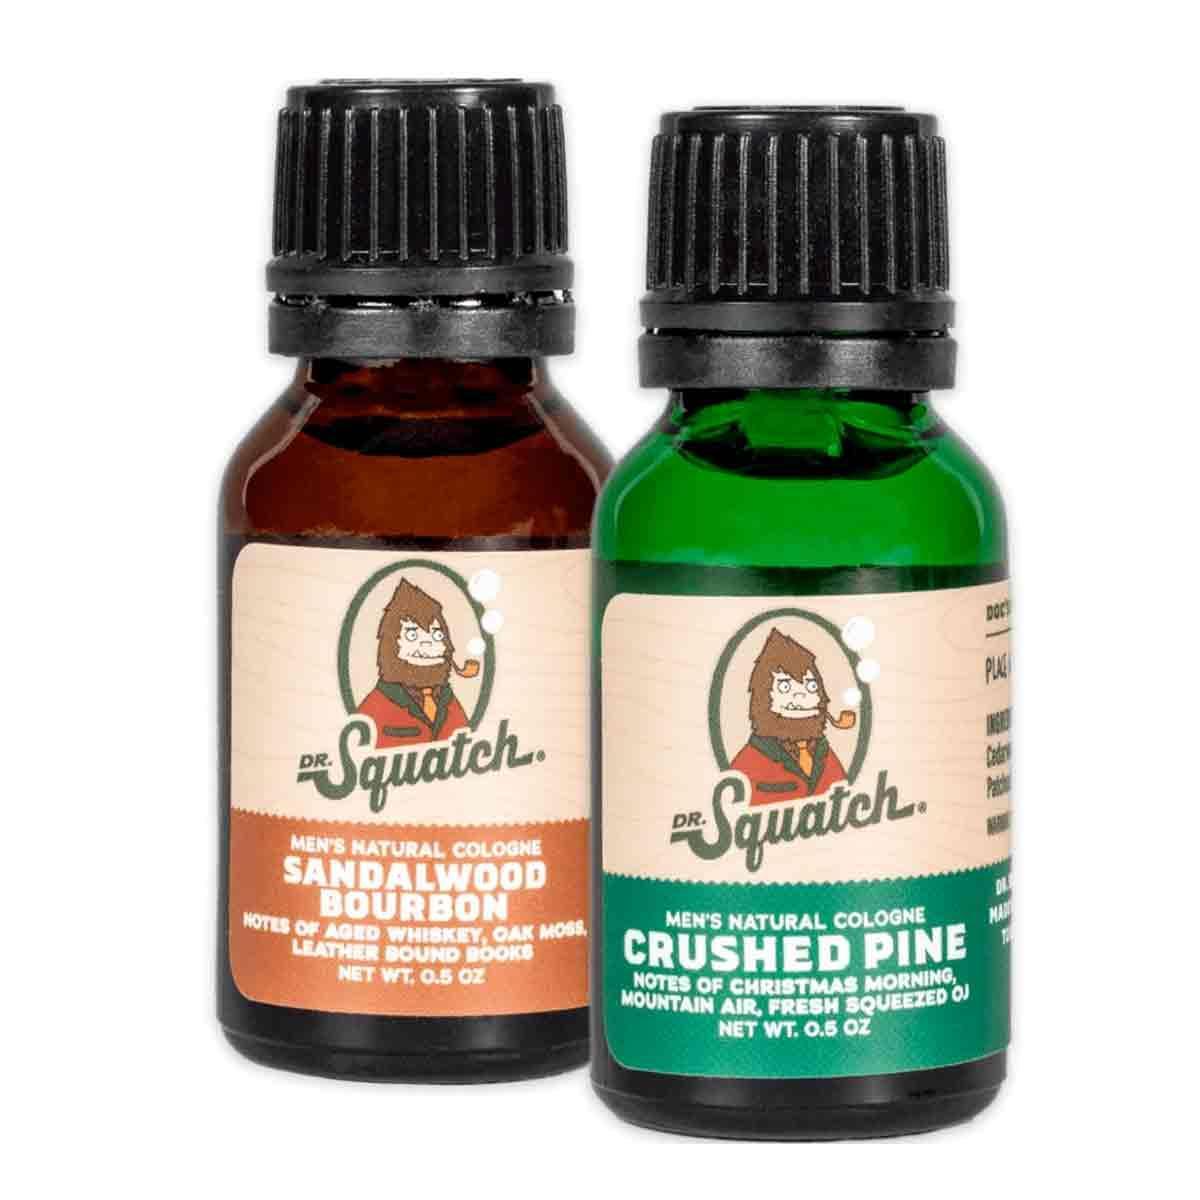 Dr. Squatch Men's Cologne Woodland Pine - Natural Cologne Made with Sustainably-Sourced Ingredients - Manly Fragrance of Pine, Cypress, and Vetiver